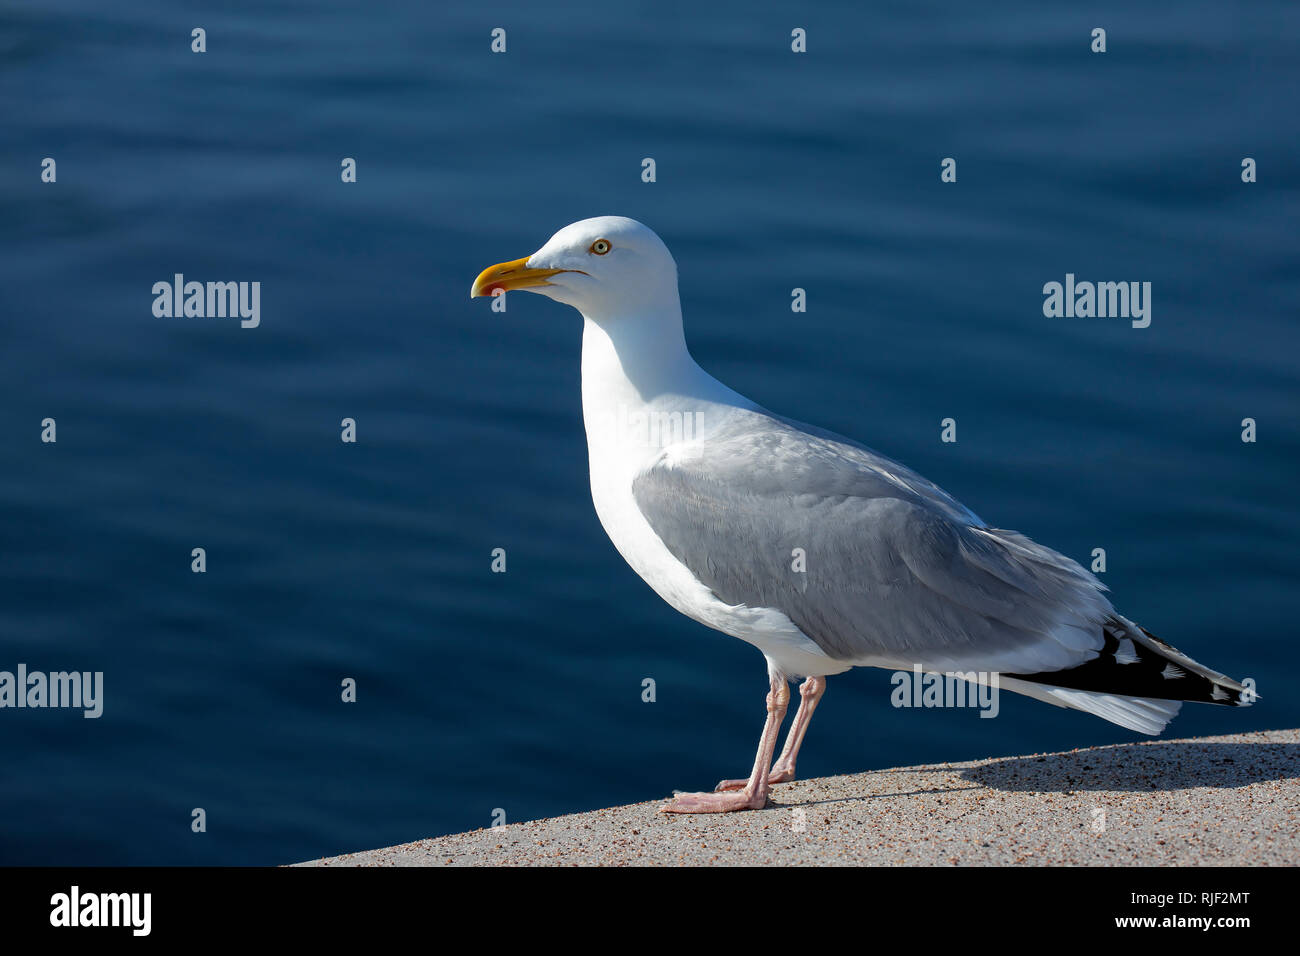 Seagull posing on Chateau L Etoc on Alderney, channel islands. Stock Photo